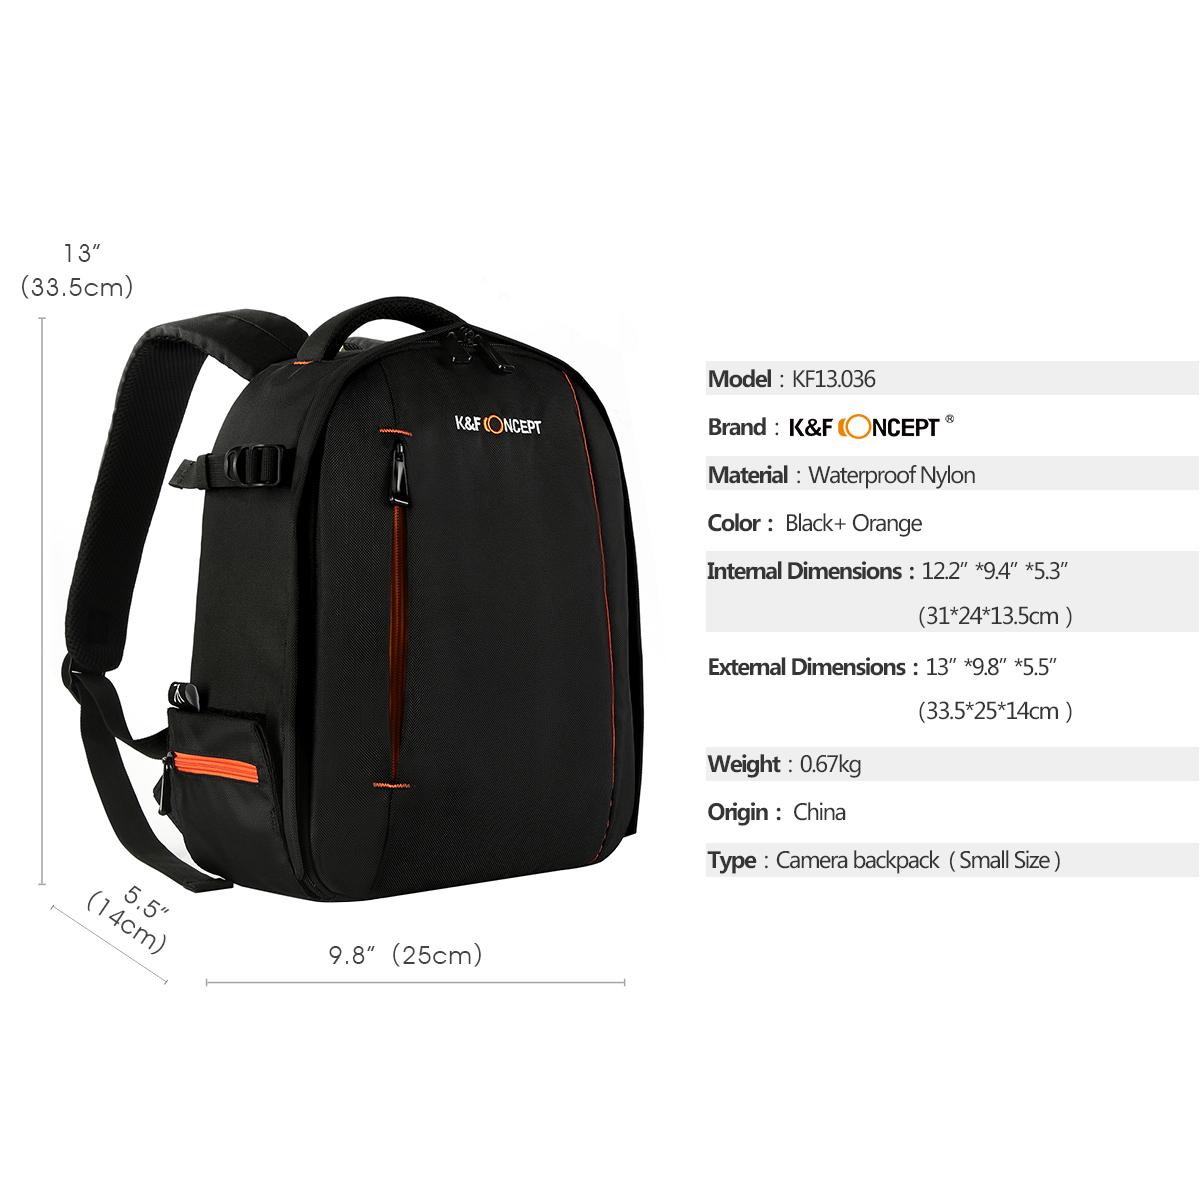 Small DSLR Camera Backpack for Travel Outdoor Photography 13*9.8*5.5 ...